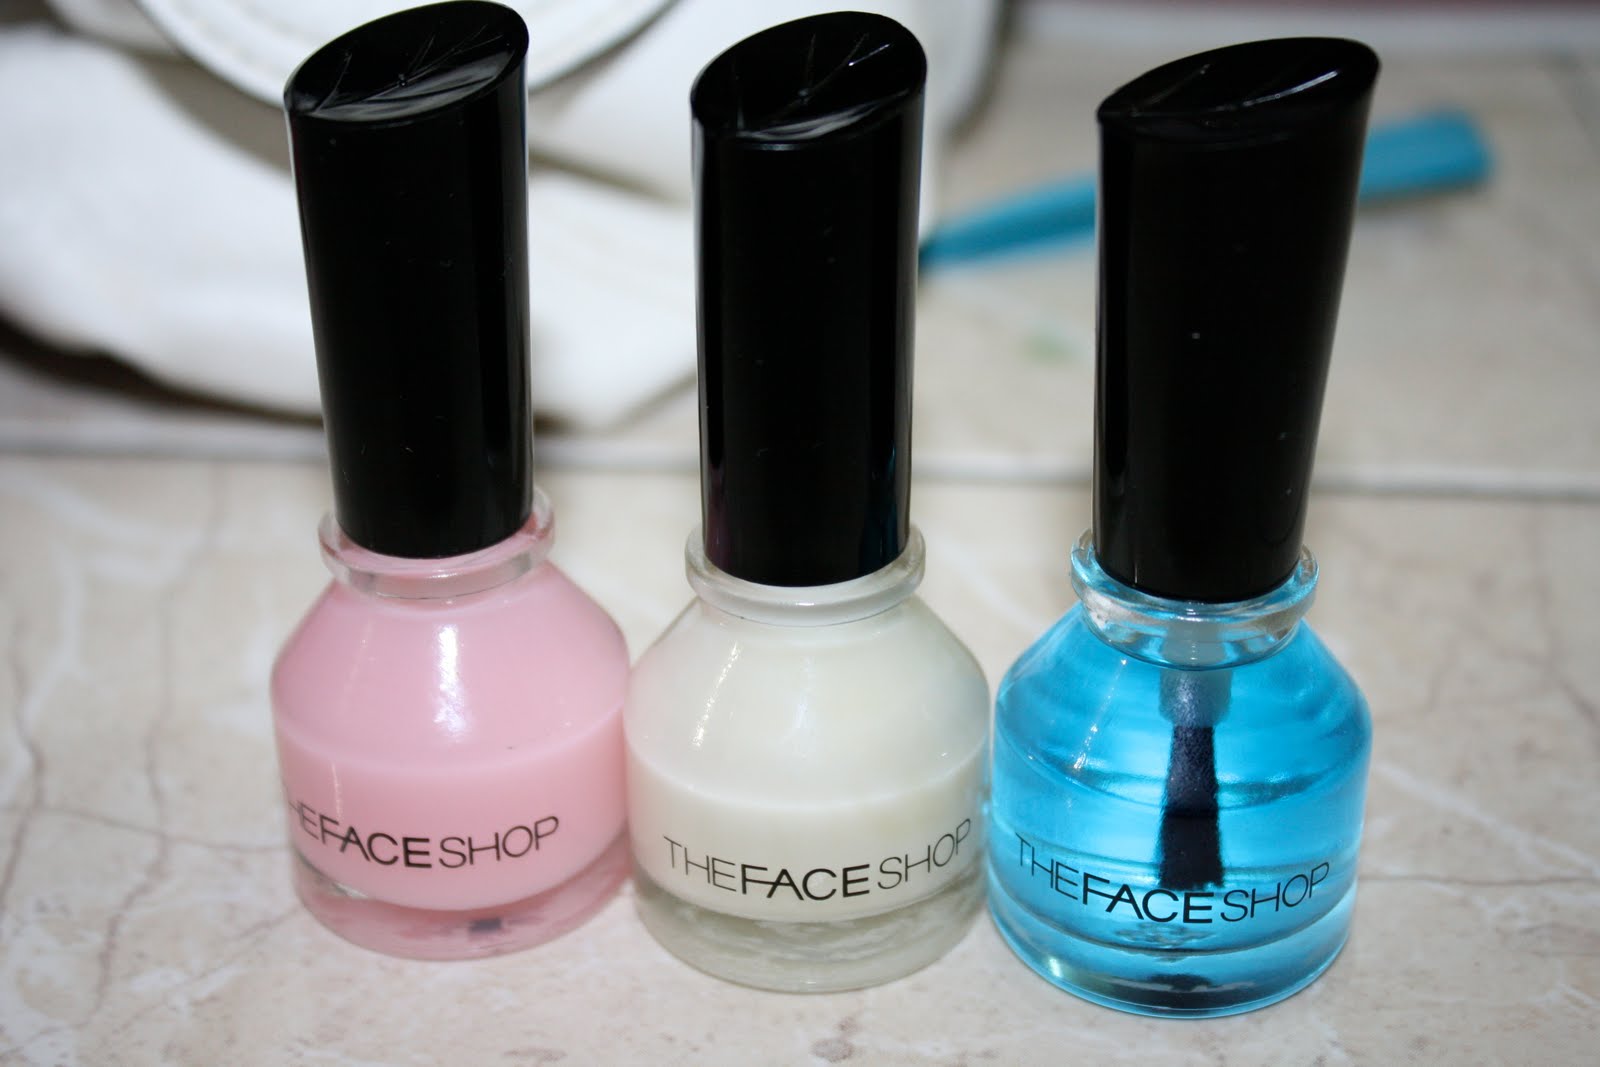 From left to right : The base coat, nail nutrition coat and the top coat